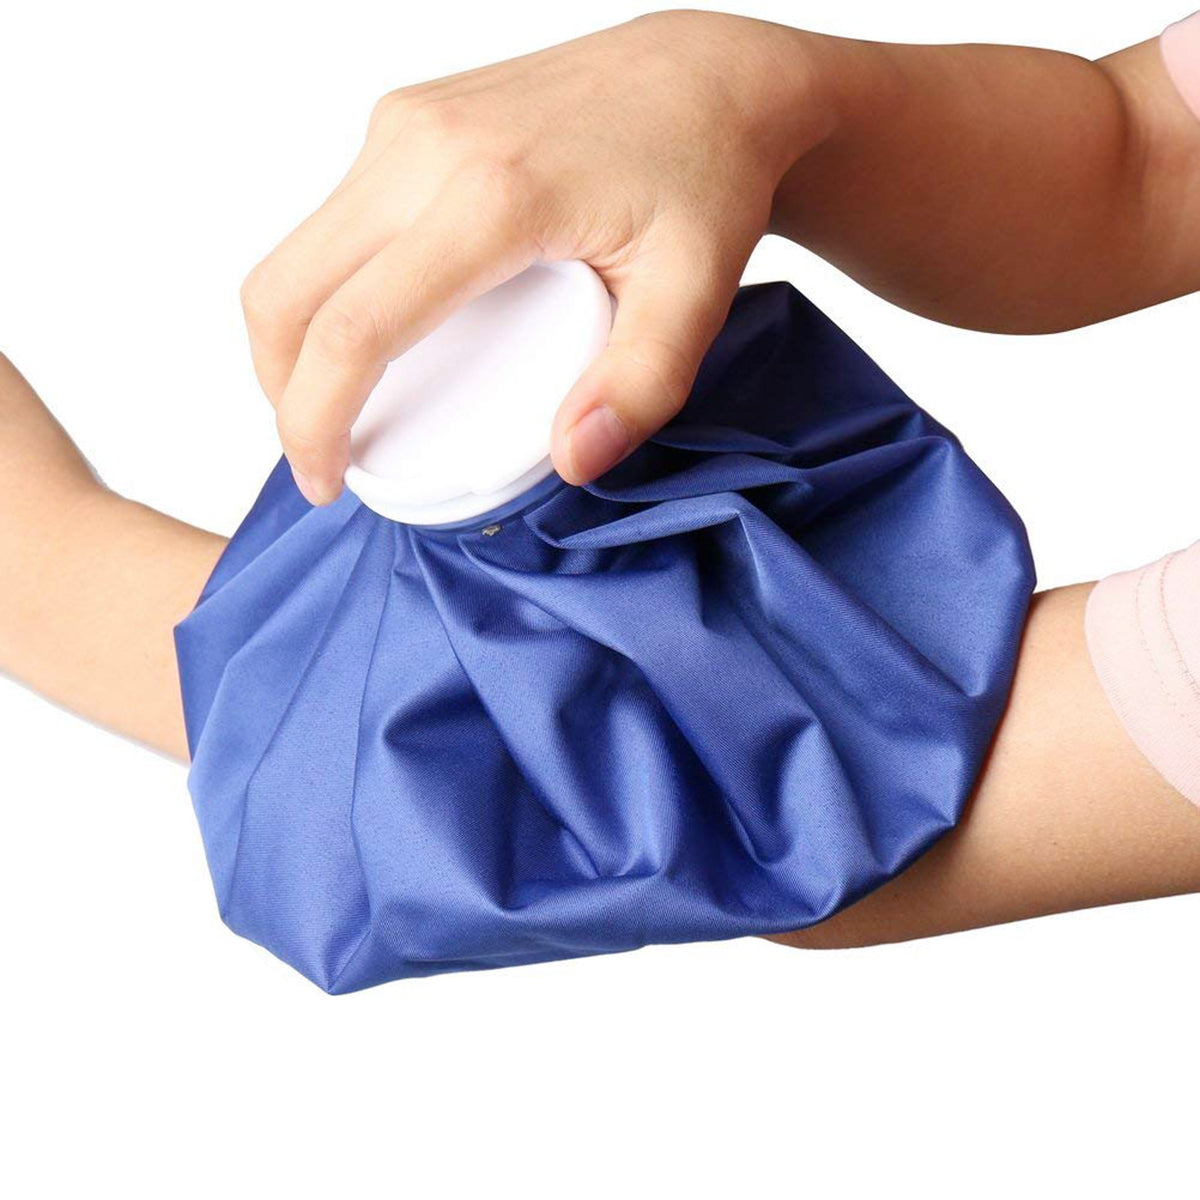 Ice Bag Packs - Set of 3 Hot & Cold Reusable Ice Bags, Instant Relief From Pain And Swelling - Flexible Design to Perfect - ebowsos